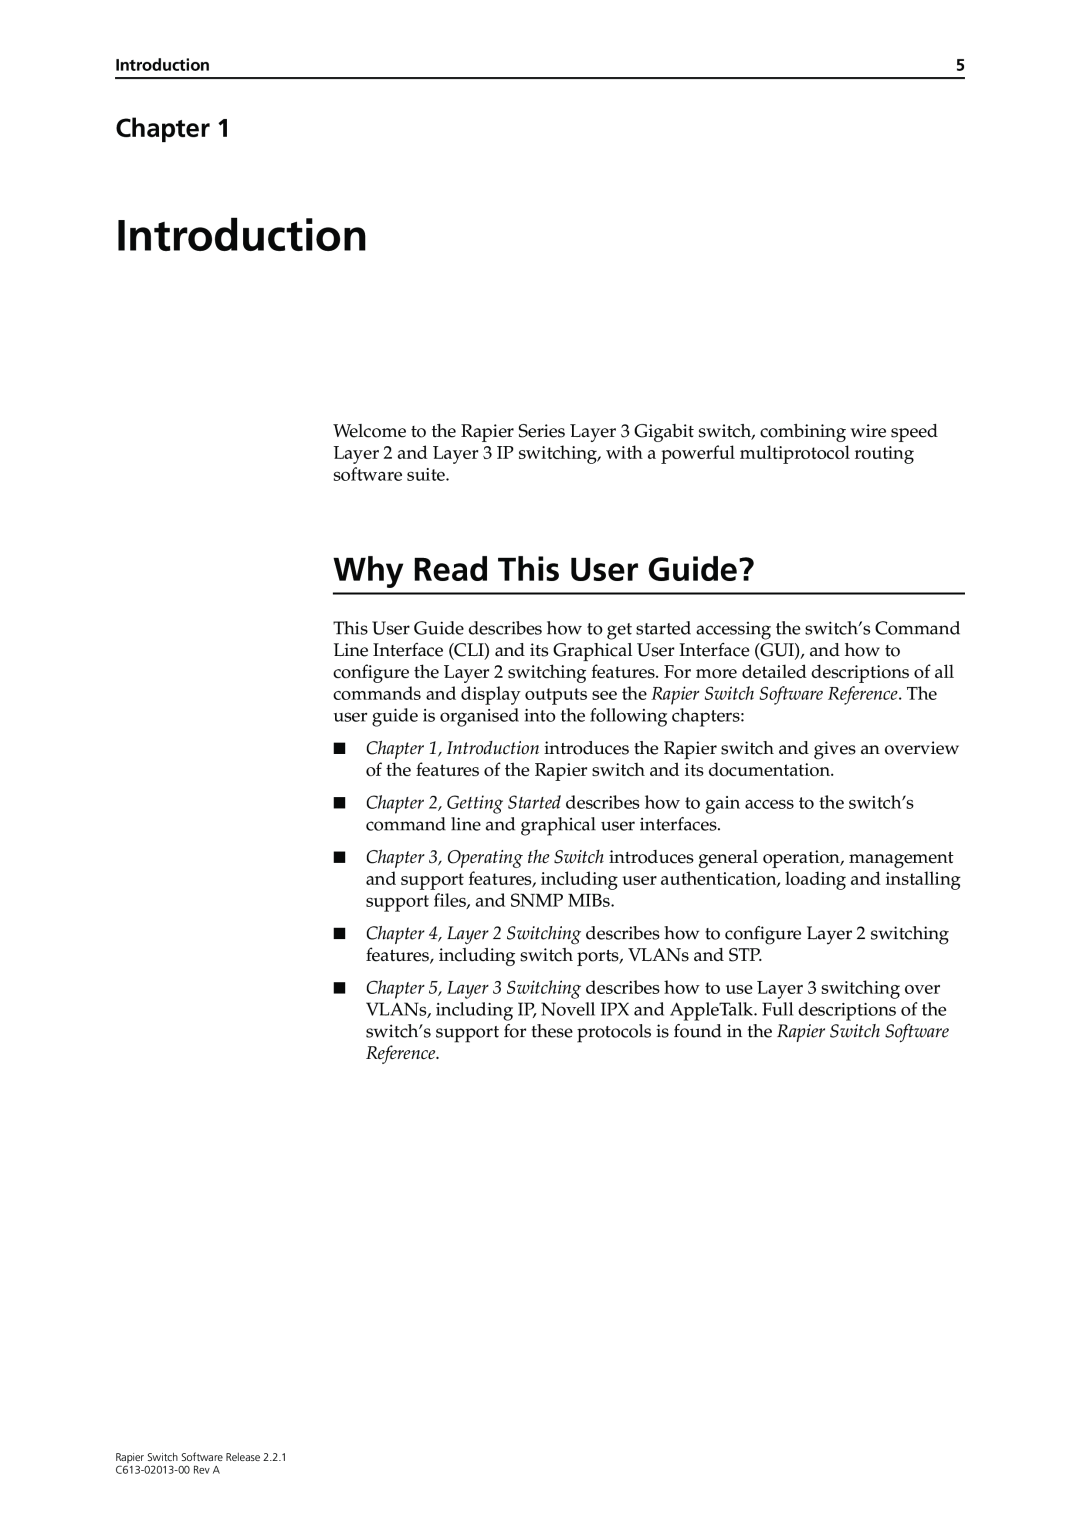 Allied Telesis C613-02013-00 manual Introduction, Why Read This User Guide?, Chapter 